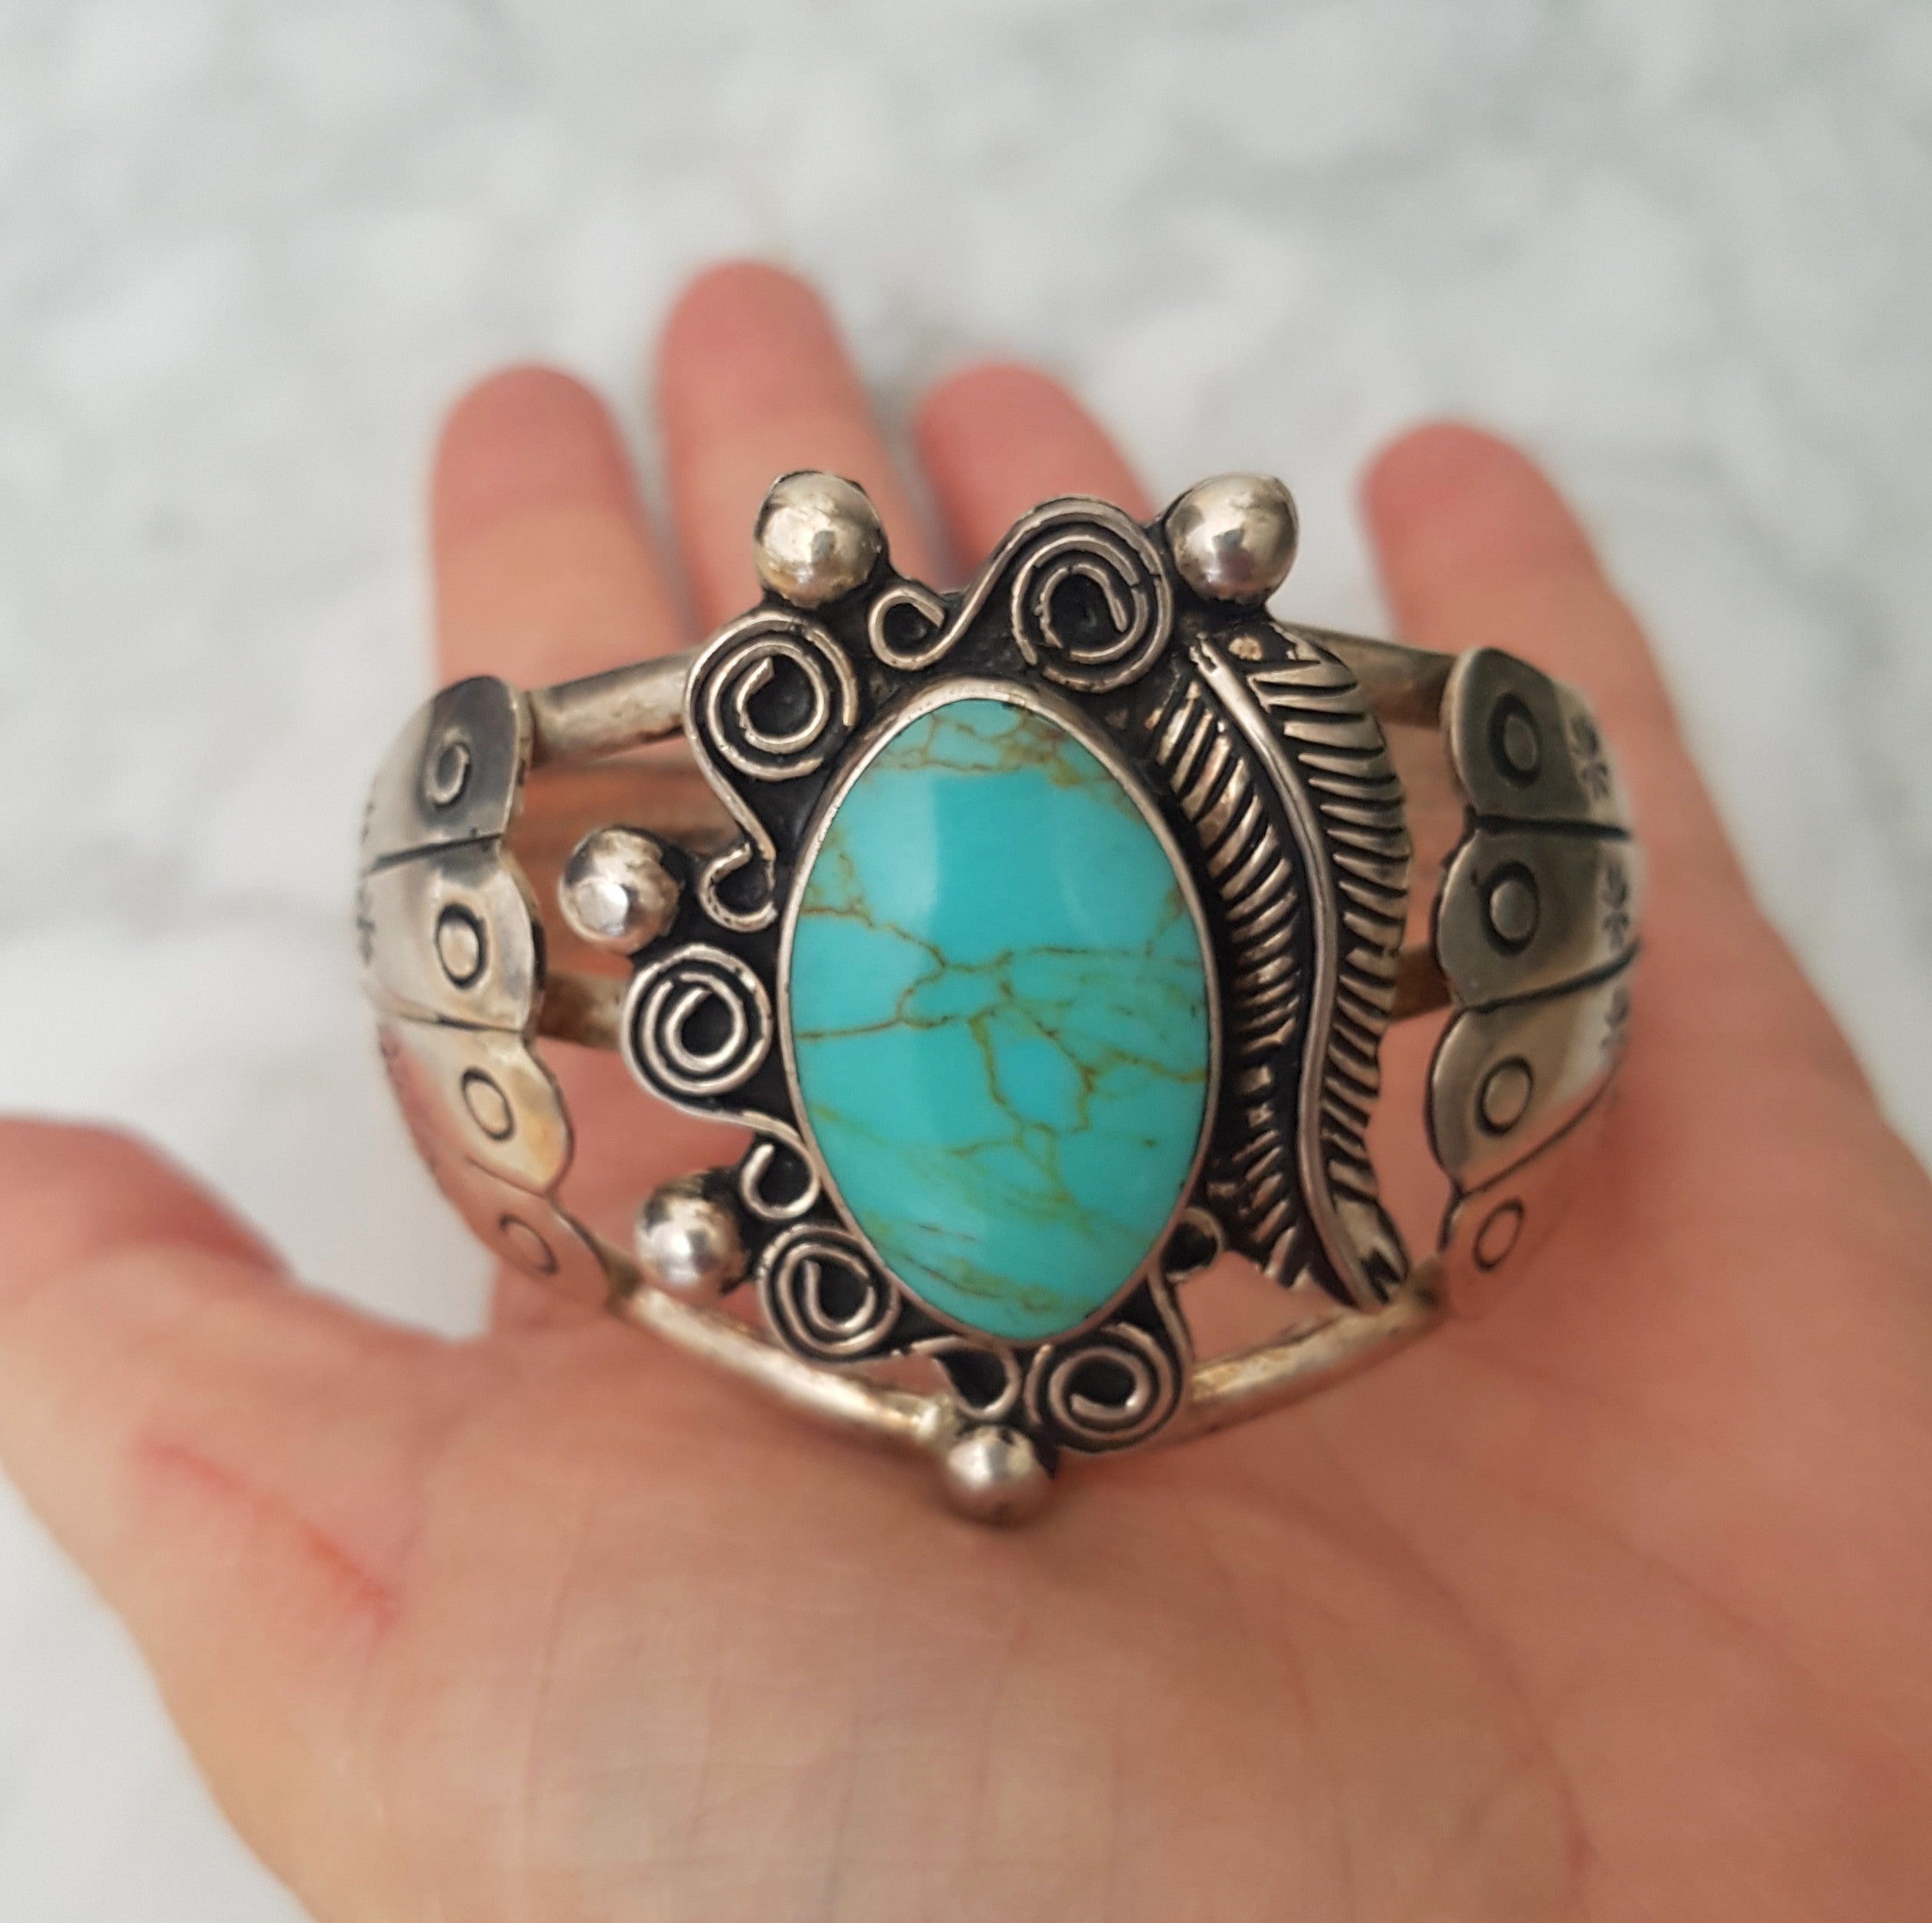 Native American Turquoise Cuff Bracelet - Small